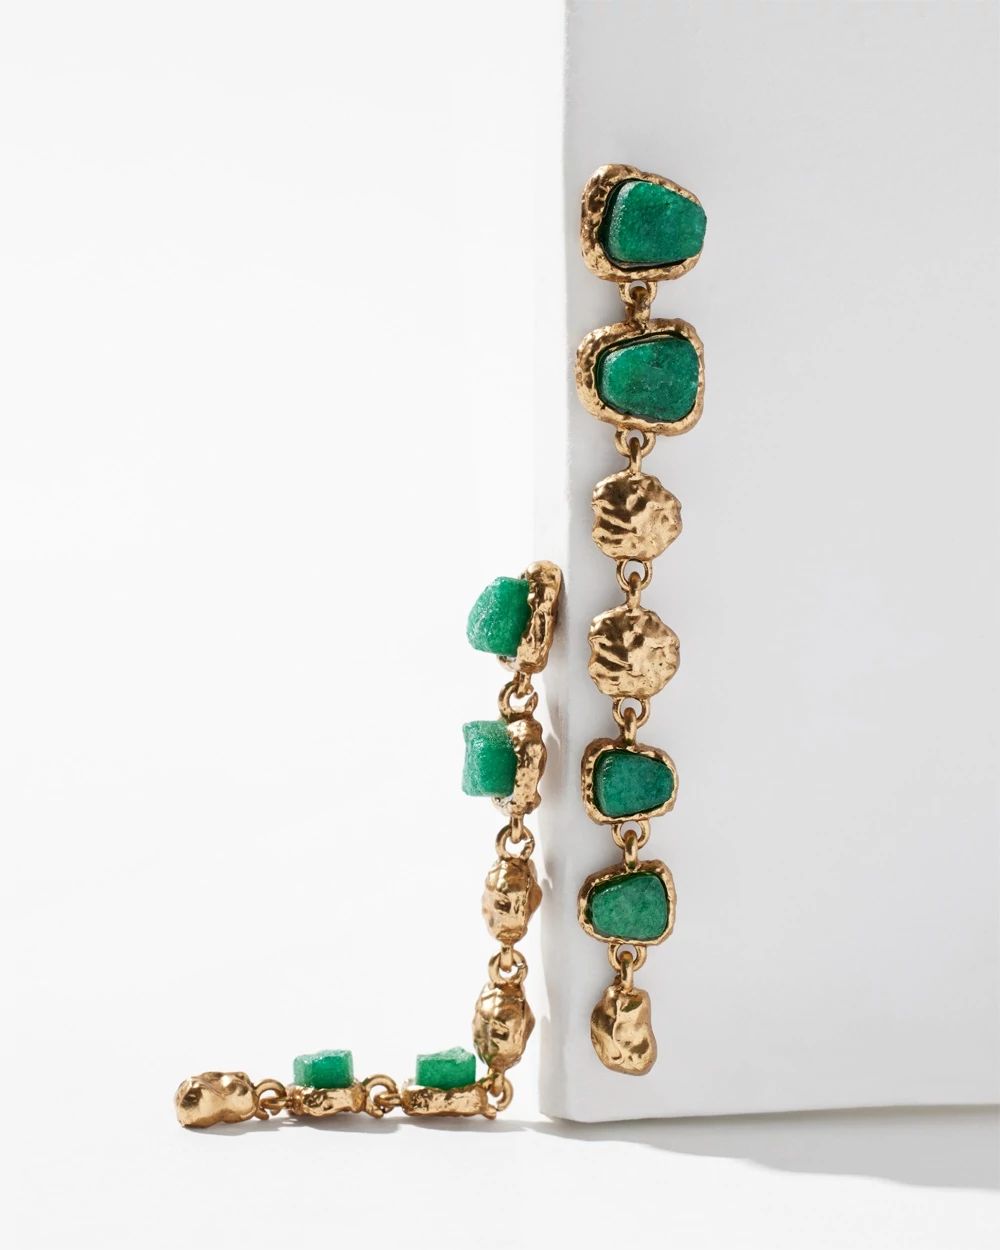 Goldtone + Green Stone Linear Earrings click to view larger image.